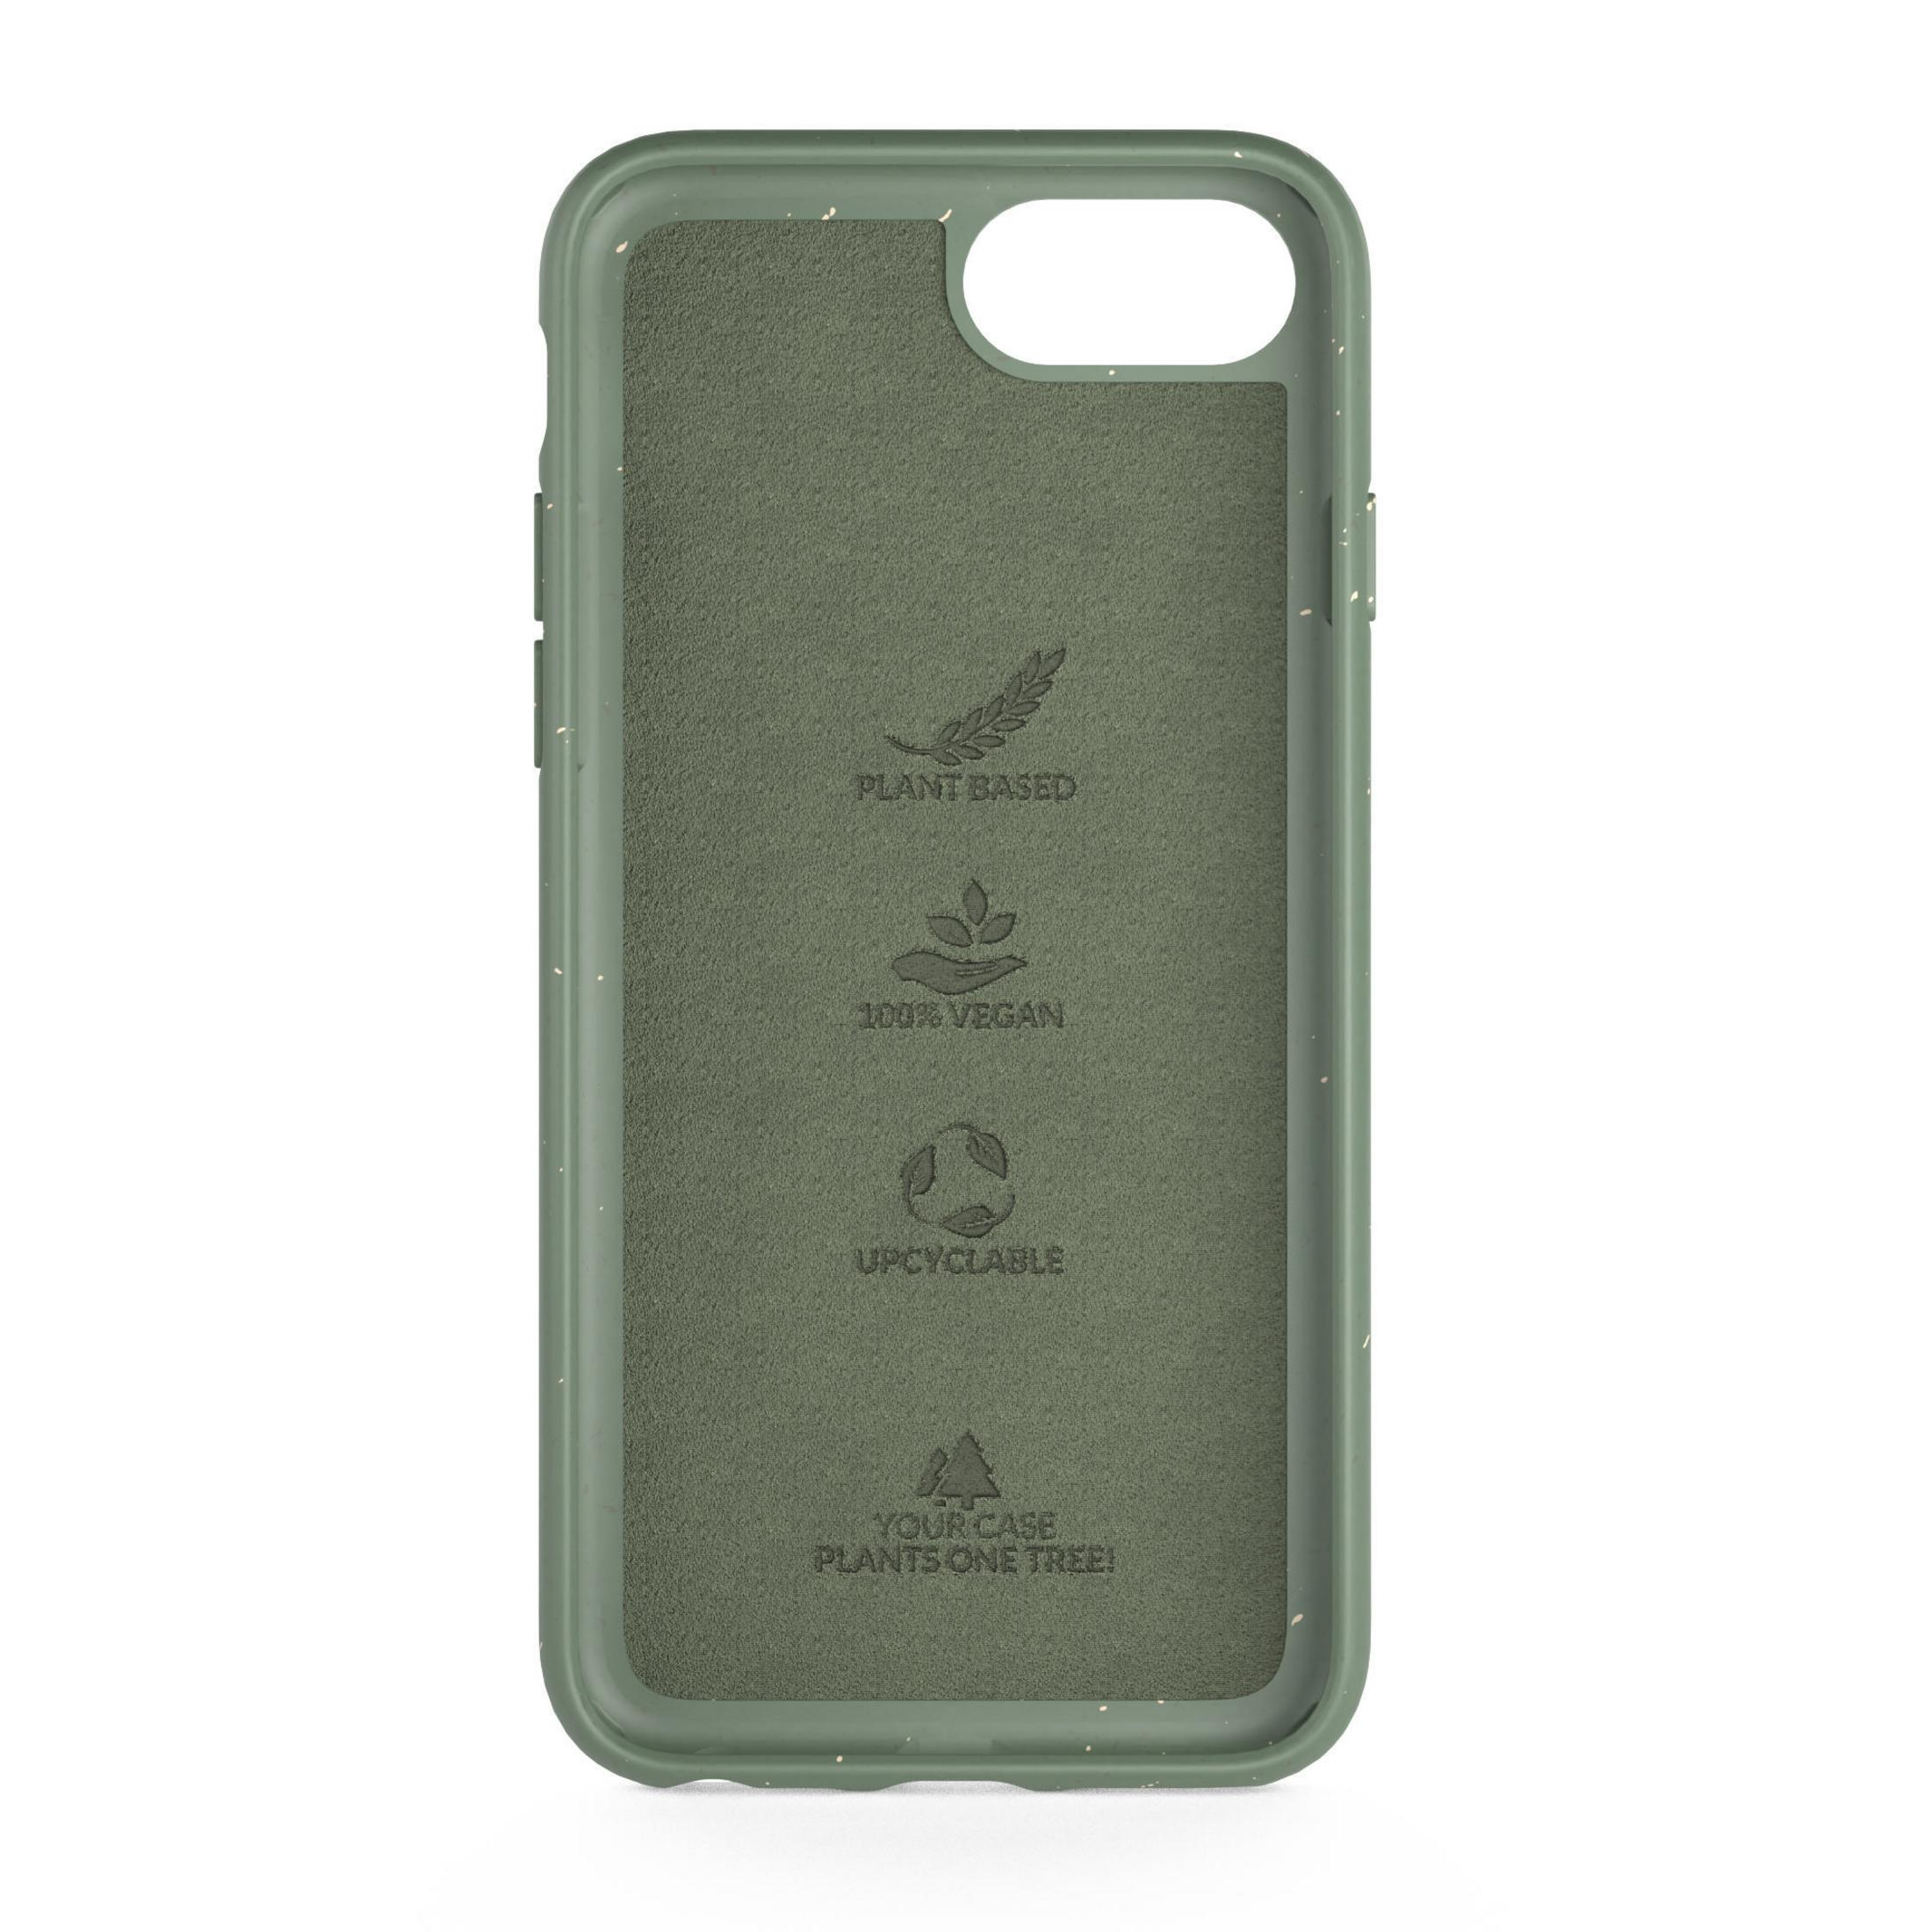 WOODCESSORIES ECO425 7 8 6 Grün Backcover, ANTIMICROBIAL GREEN, 7, Apple, SE BIO SE, IP CASE 8, iPhone 6